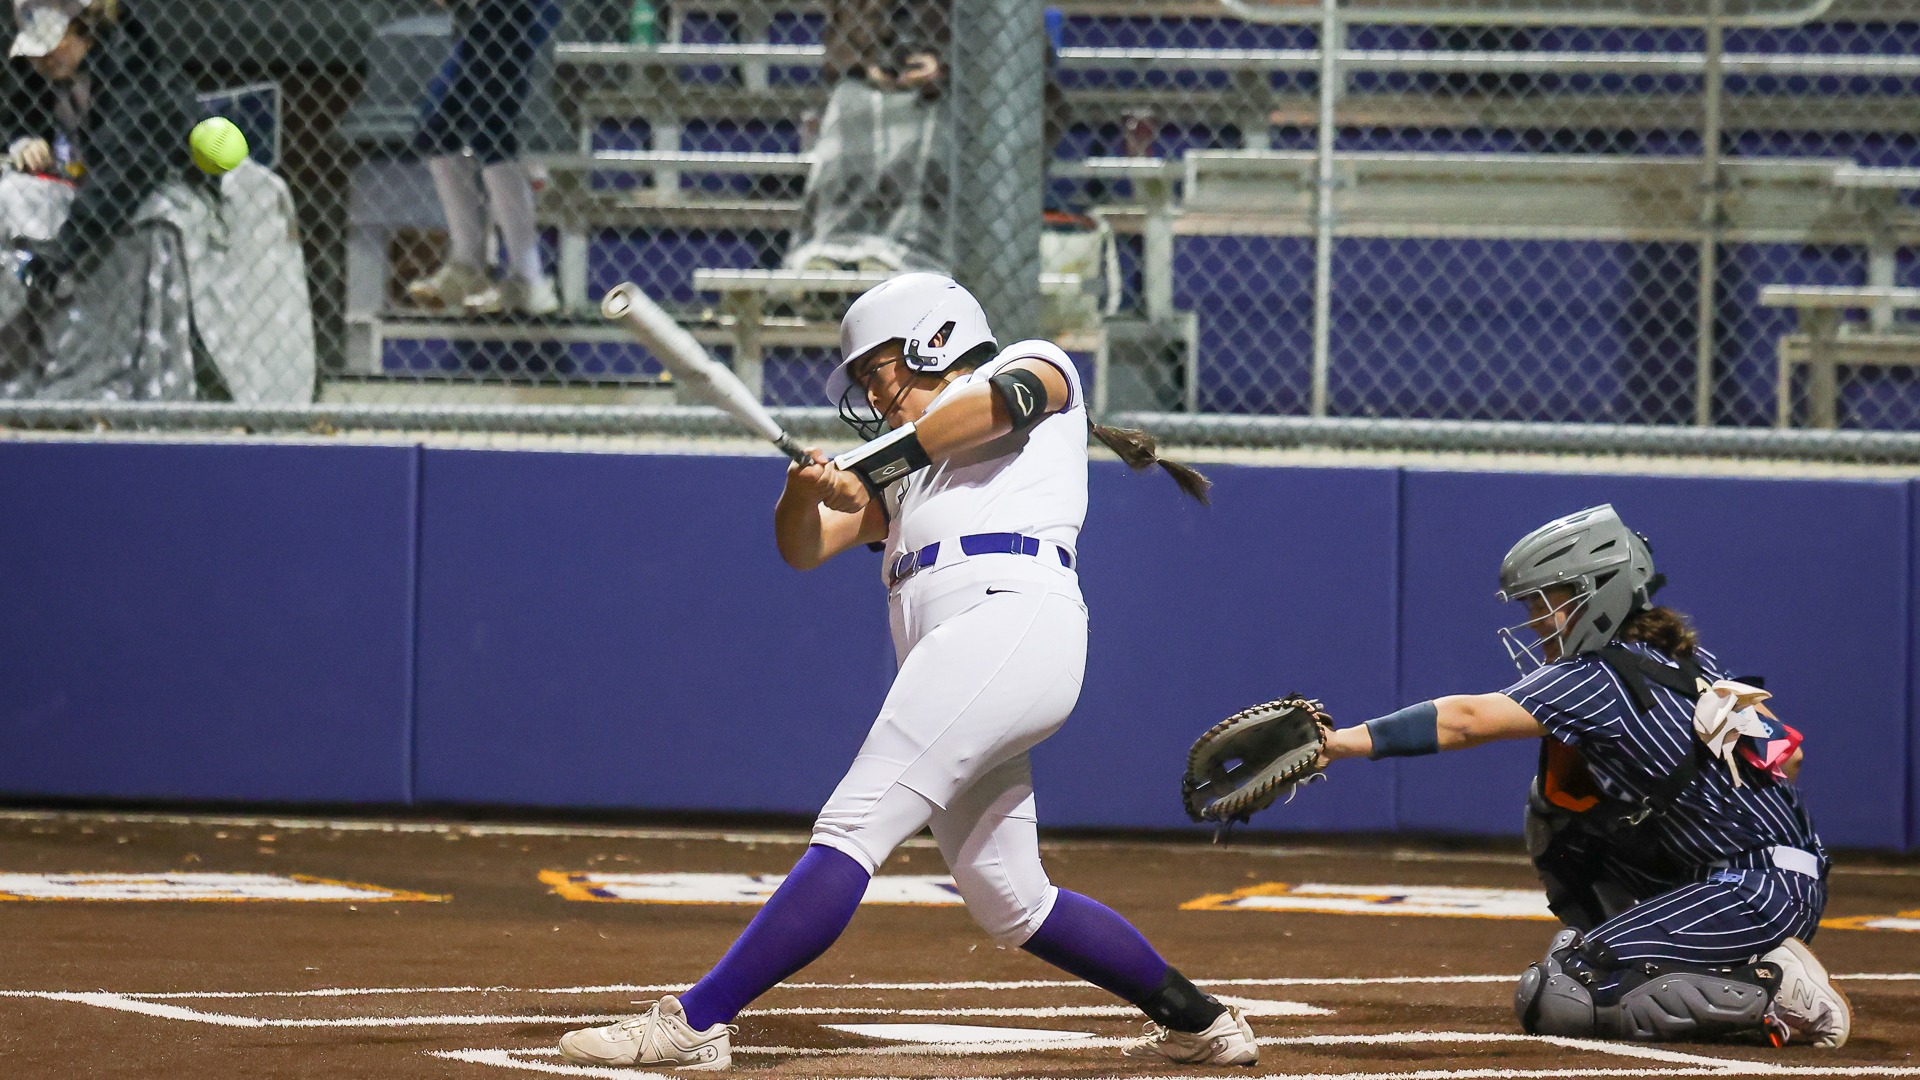 Chisholm Trail HSSlide 3 - LADY RANGERS FALL SHORT DESPITE SIXTH INNING RALLY AGAINST L.D. BELL